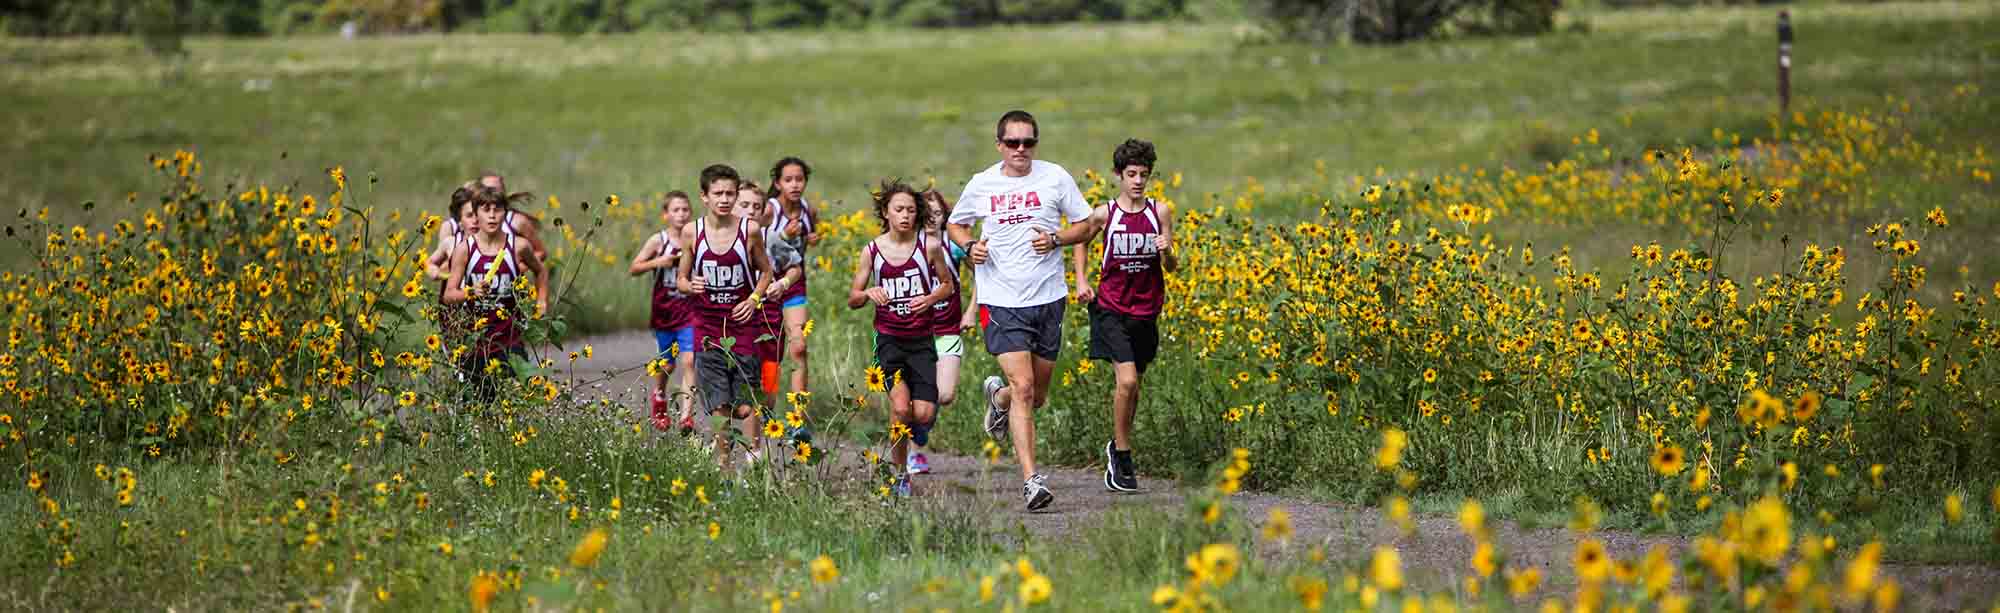 Northland Prep Cross Country Program Details & Sign-up